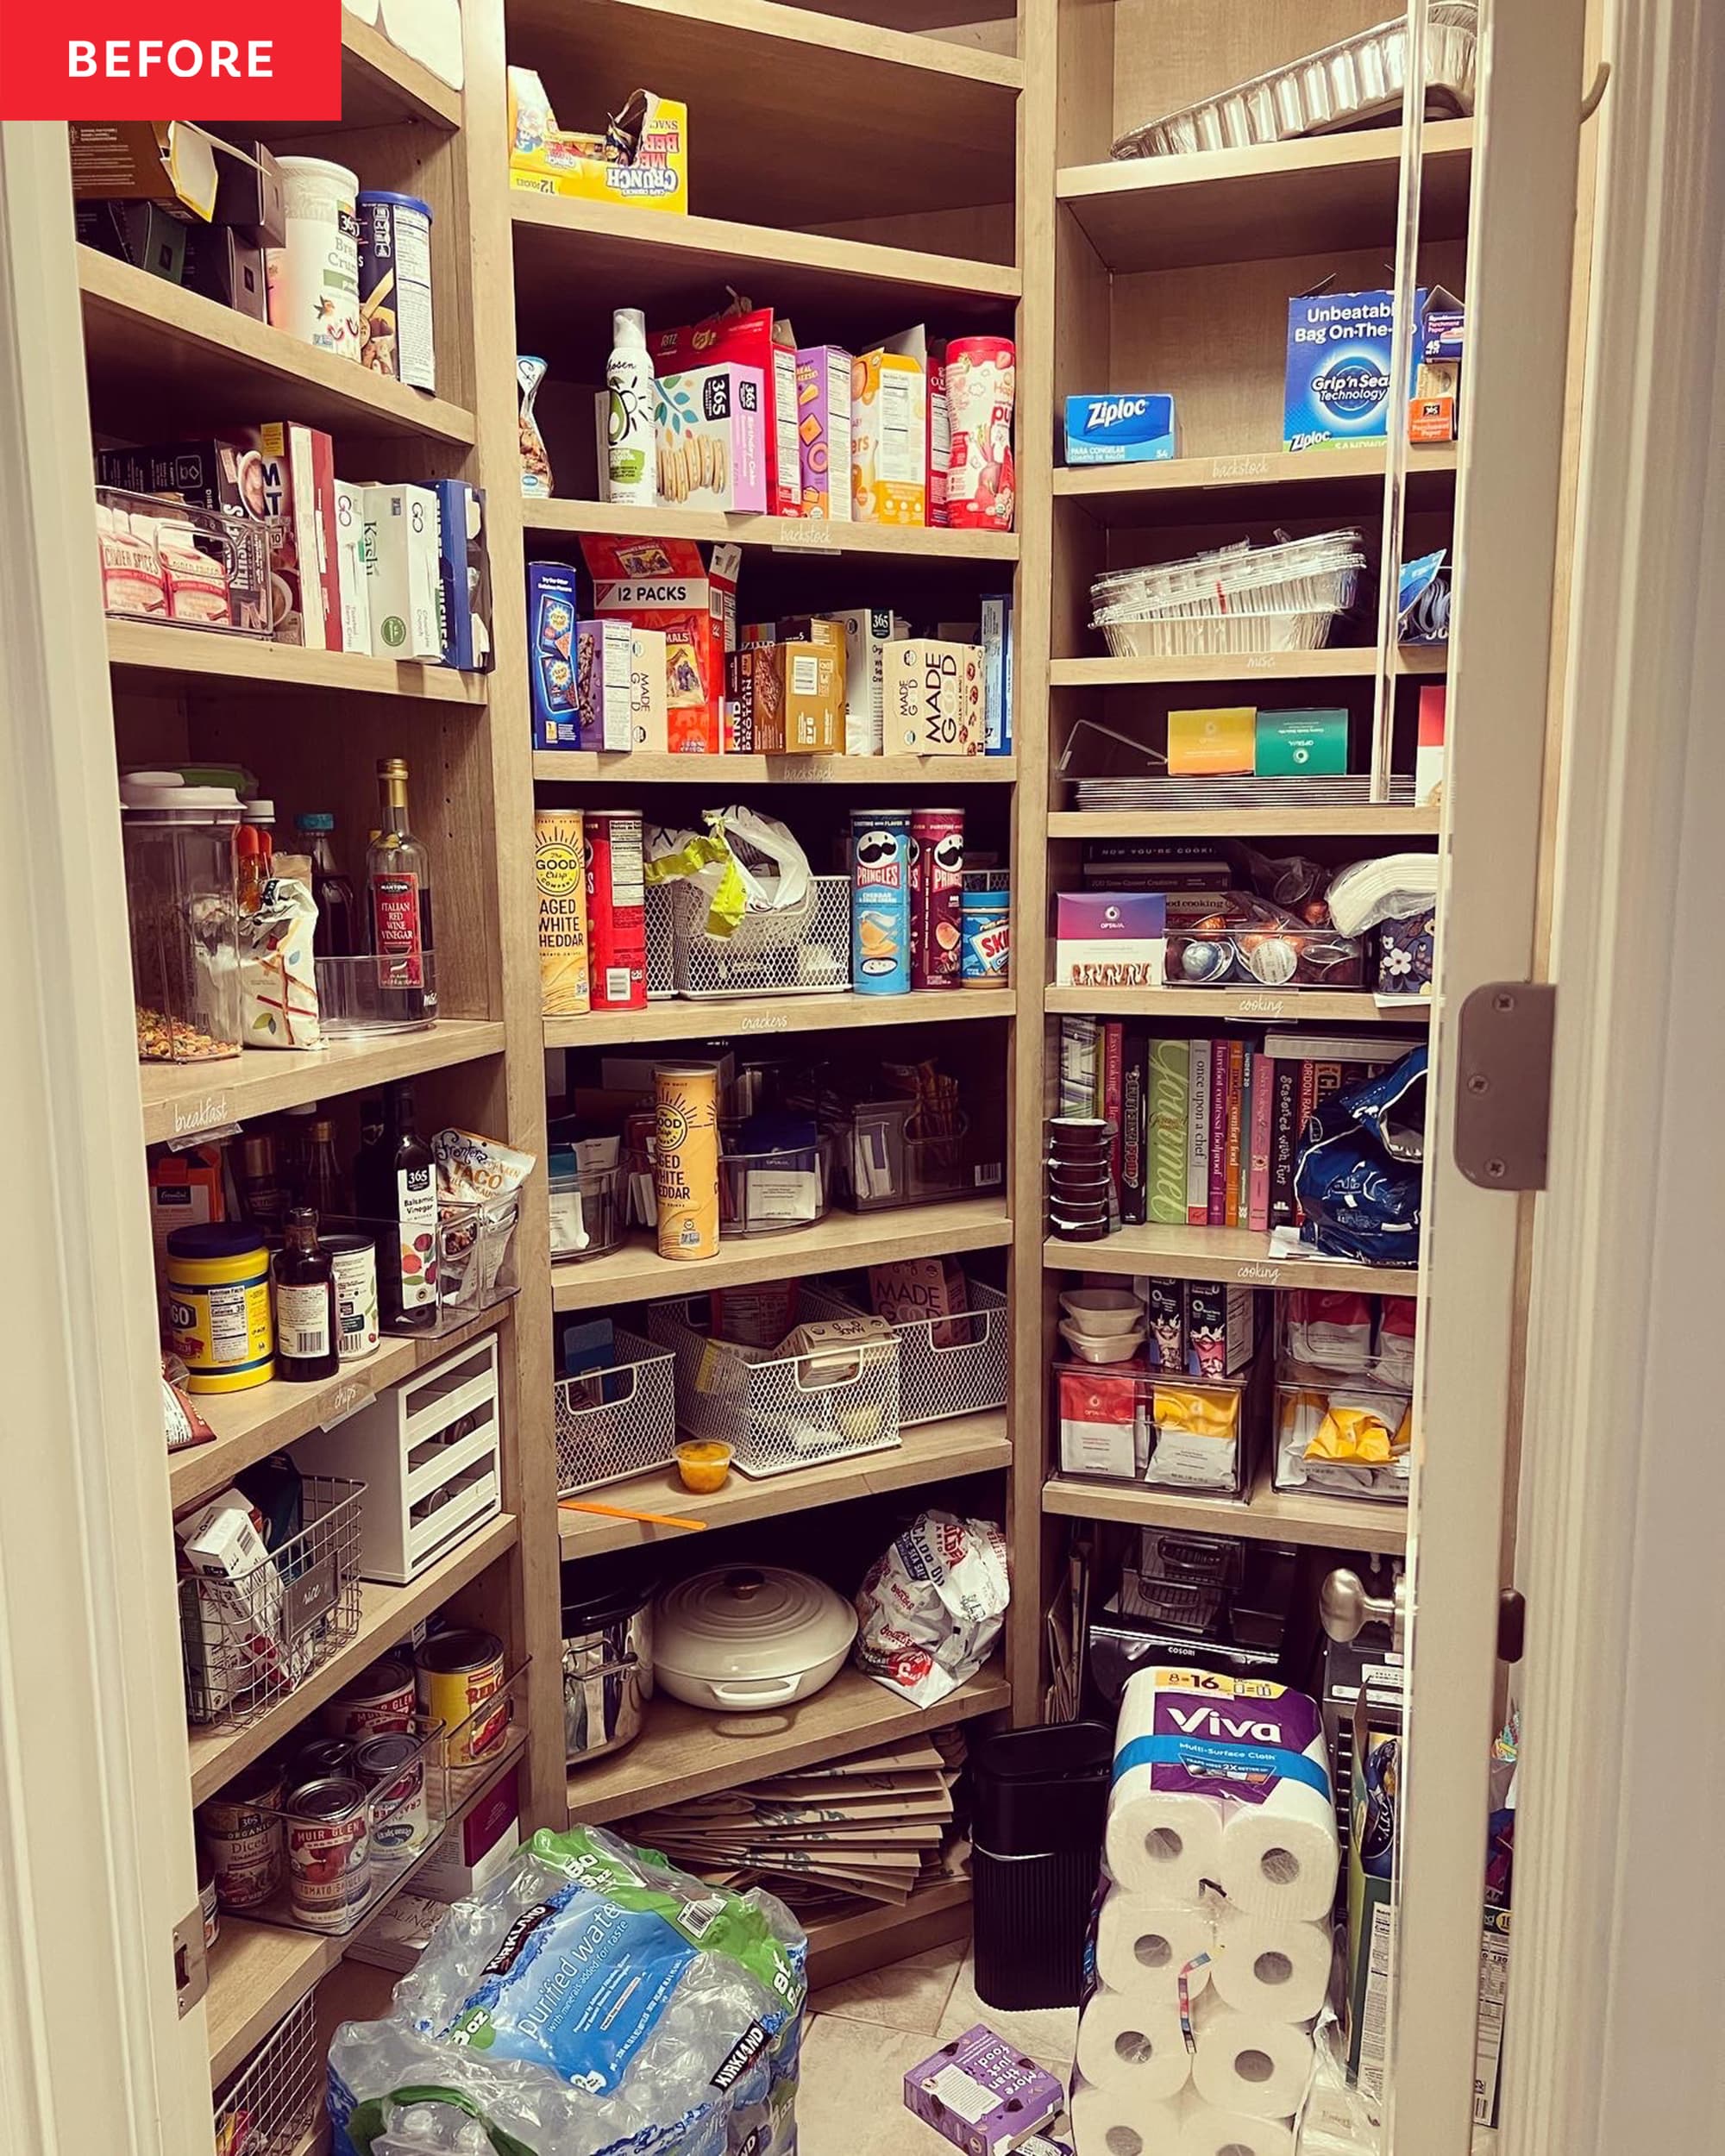 https://cdn.apartmenttherapy.info/image/upload/v1666886418/at/organize-clean/before-after/Brooke_Milton_Client_Pantry/BrookeMilton-Pantry-Before.jpg